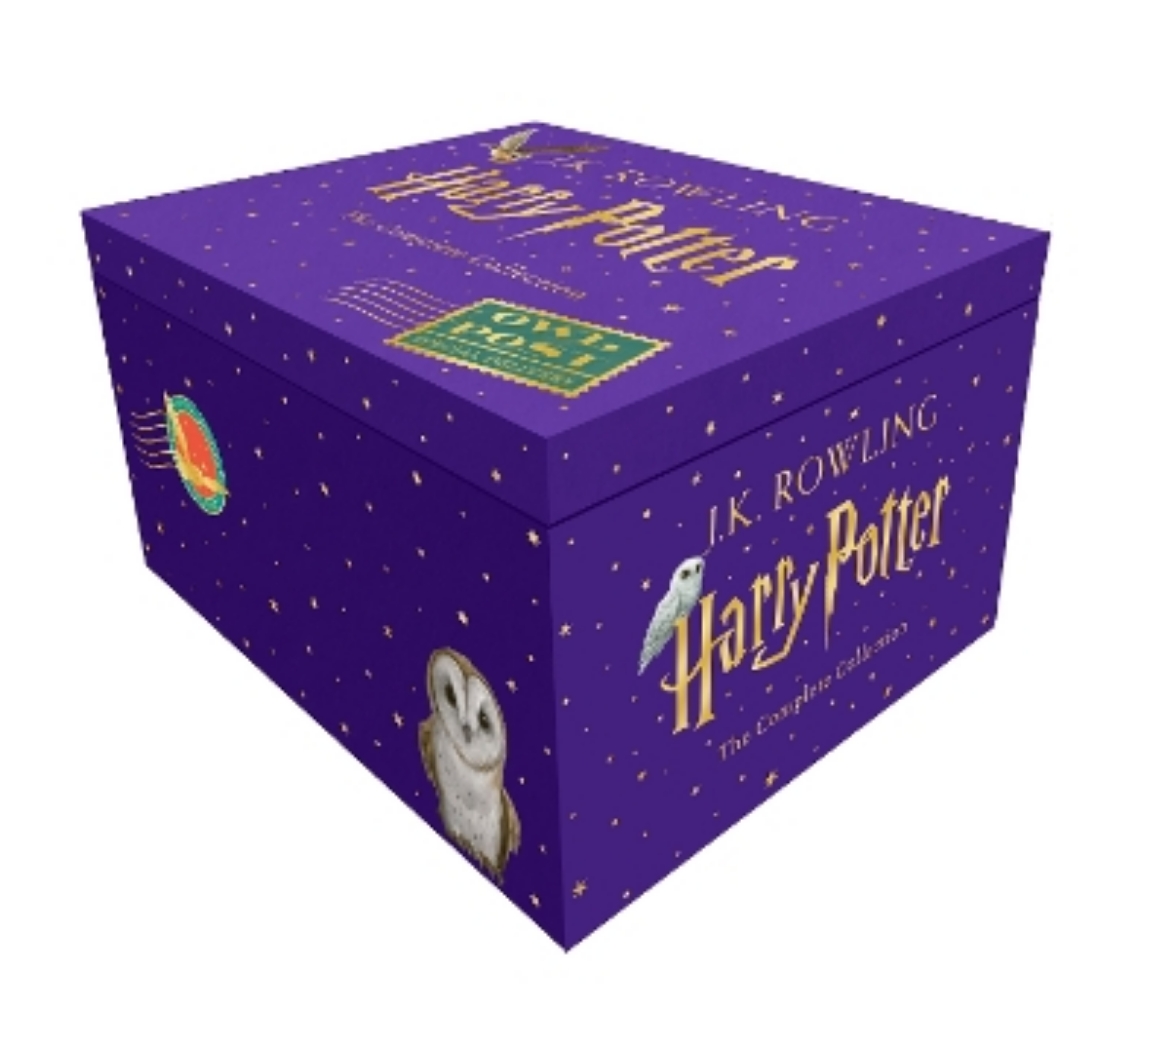 Picture of Harry Potter Owl Post Box Set (Children’s Hardback - The Complete Collection)